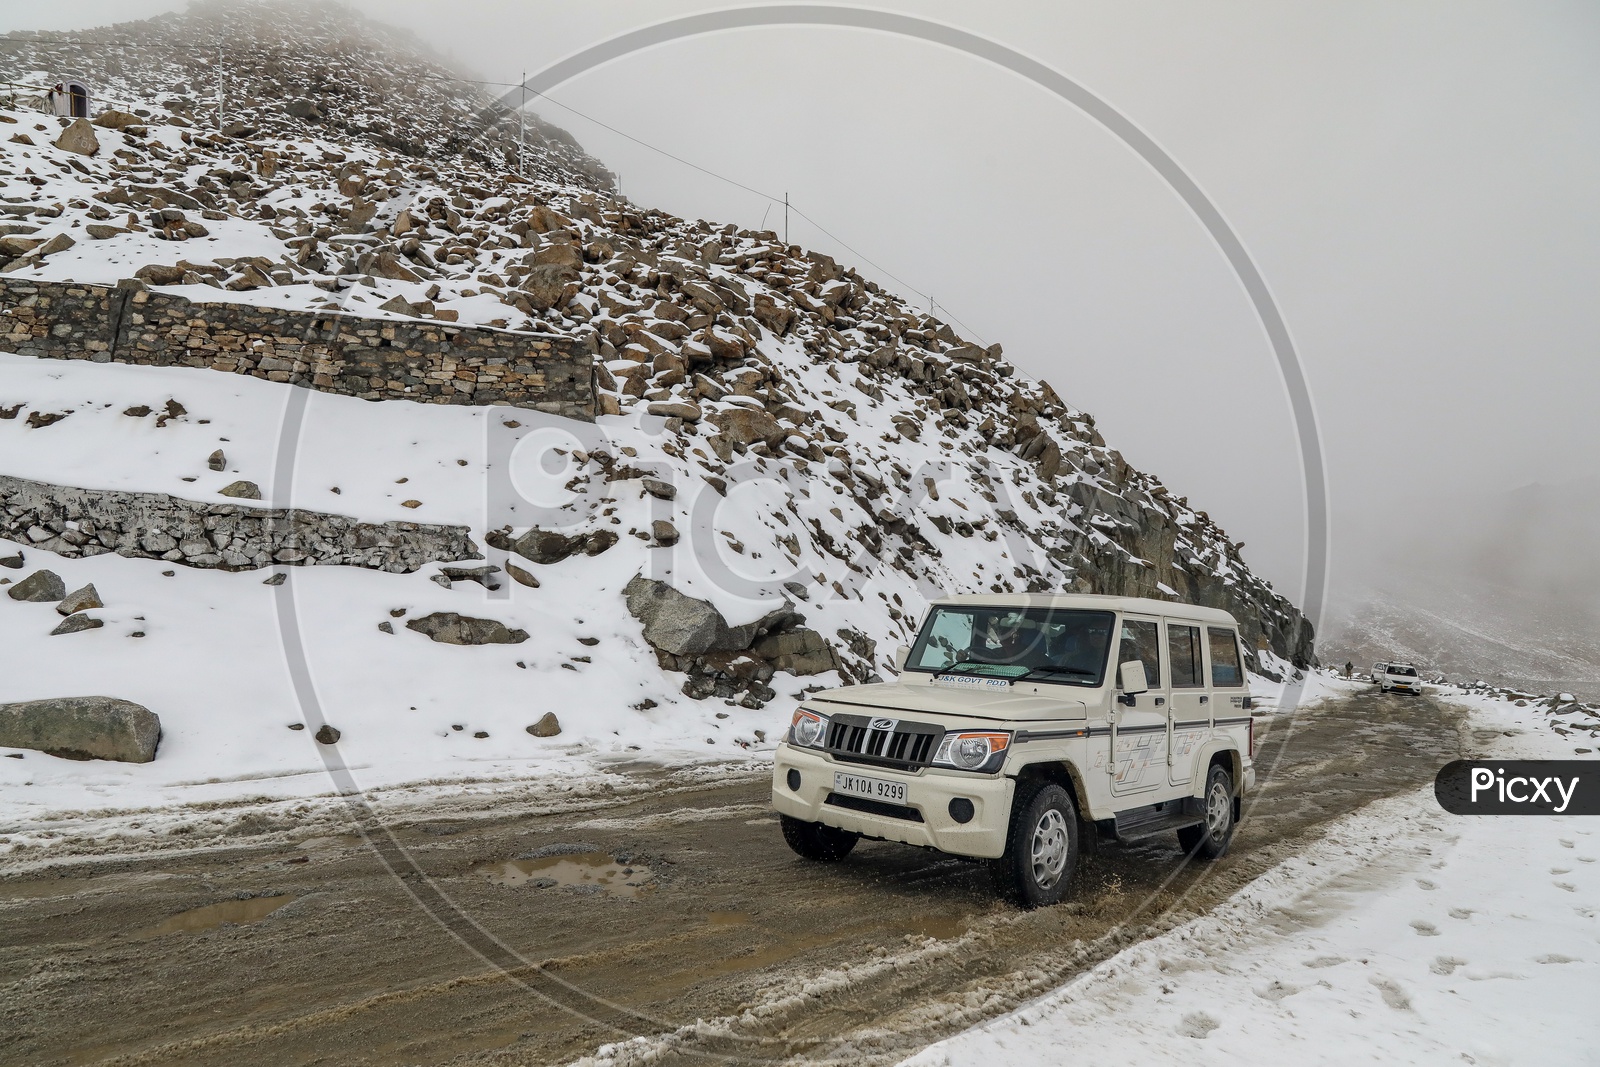 XUV Car in The Roads At Snow Capped Mountains At Ladakh